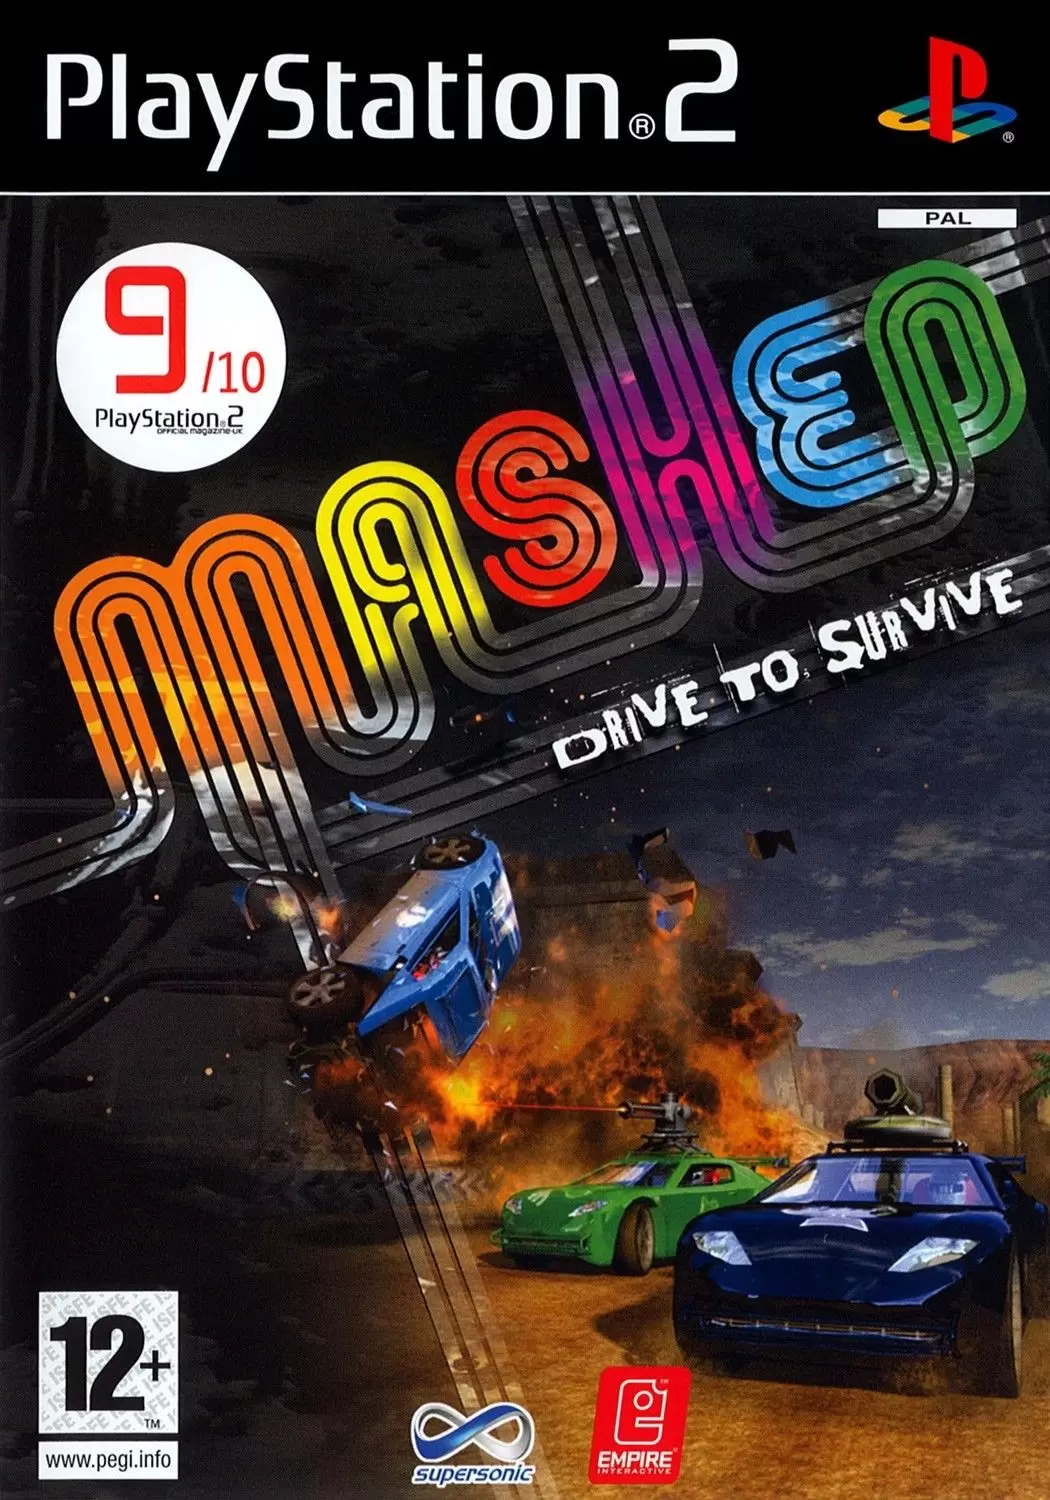 PS2 Games - Mashed: Drive to Survive